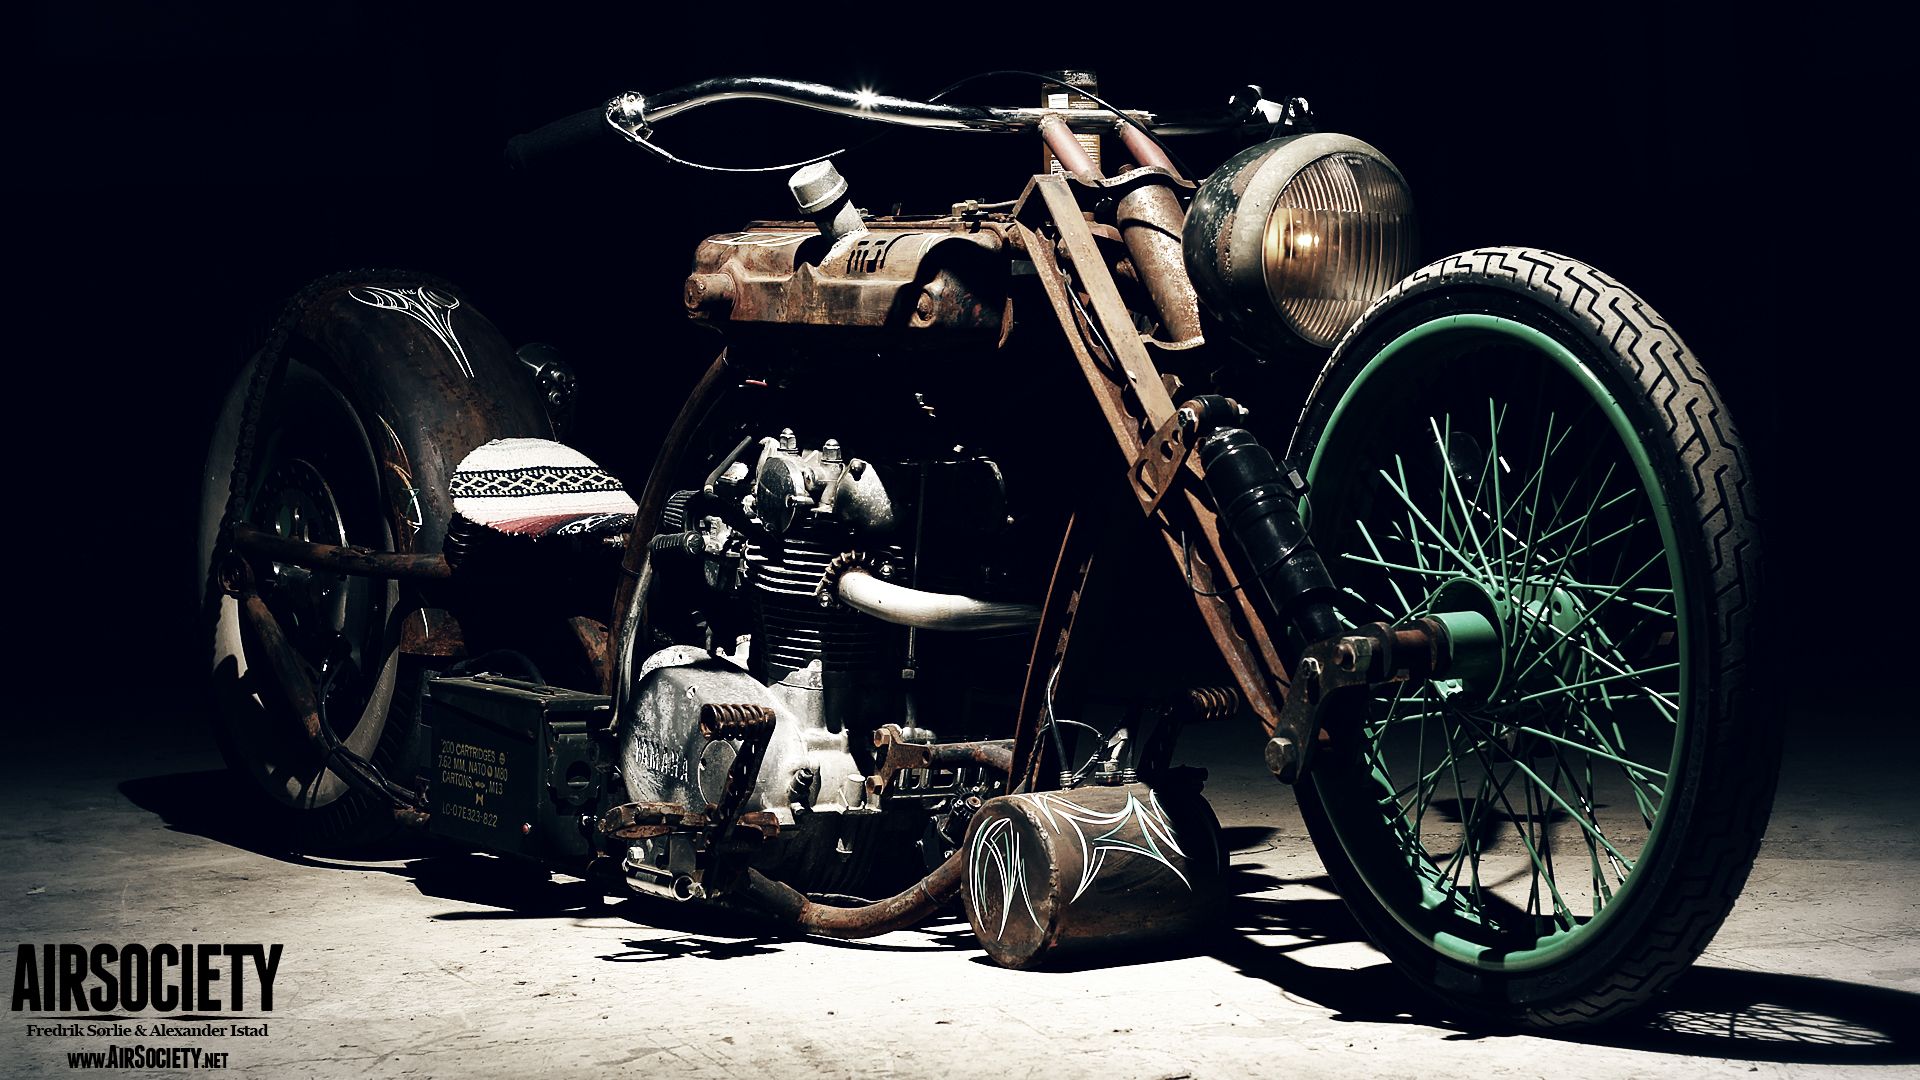 Cool Bike Wallpaper Background In HD For Free Download